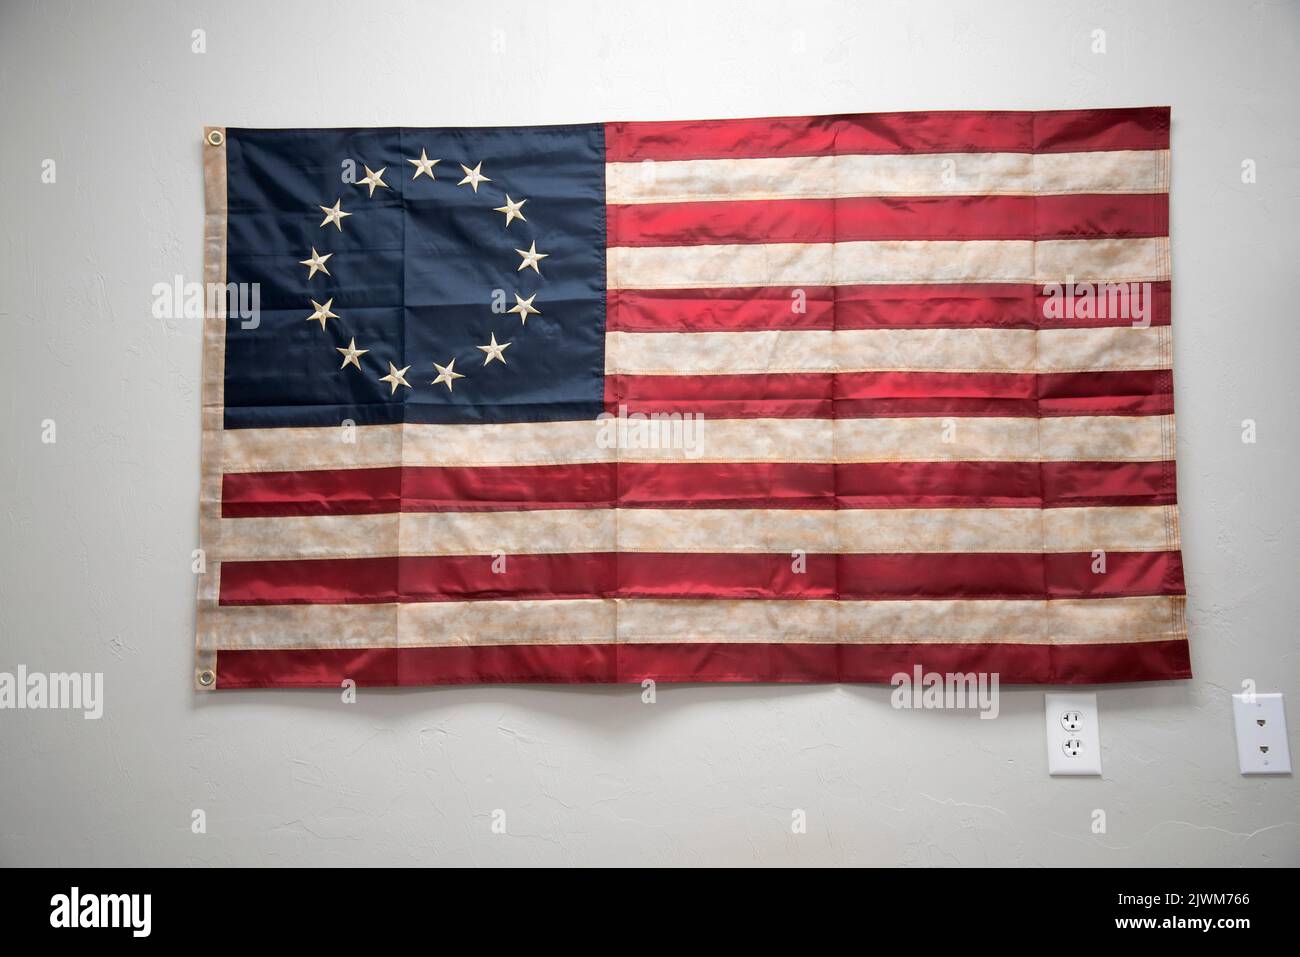 The story of the Betsy Ross flag is that it was requested by General George Washington and the Continental Congress that a flag be created to signify Stock Photo